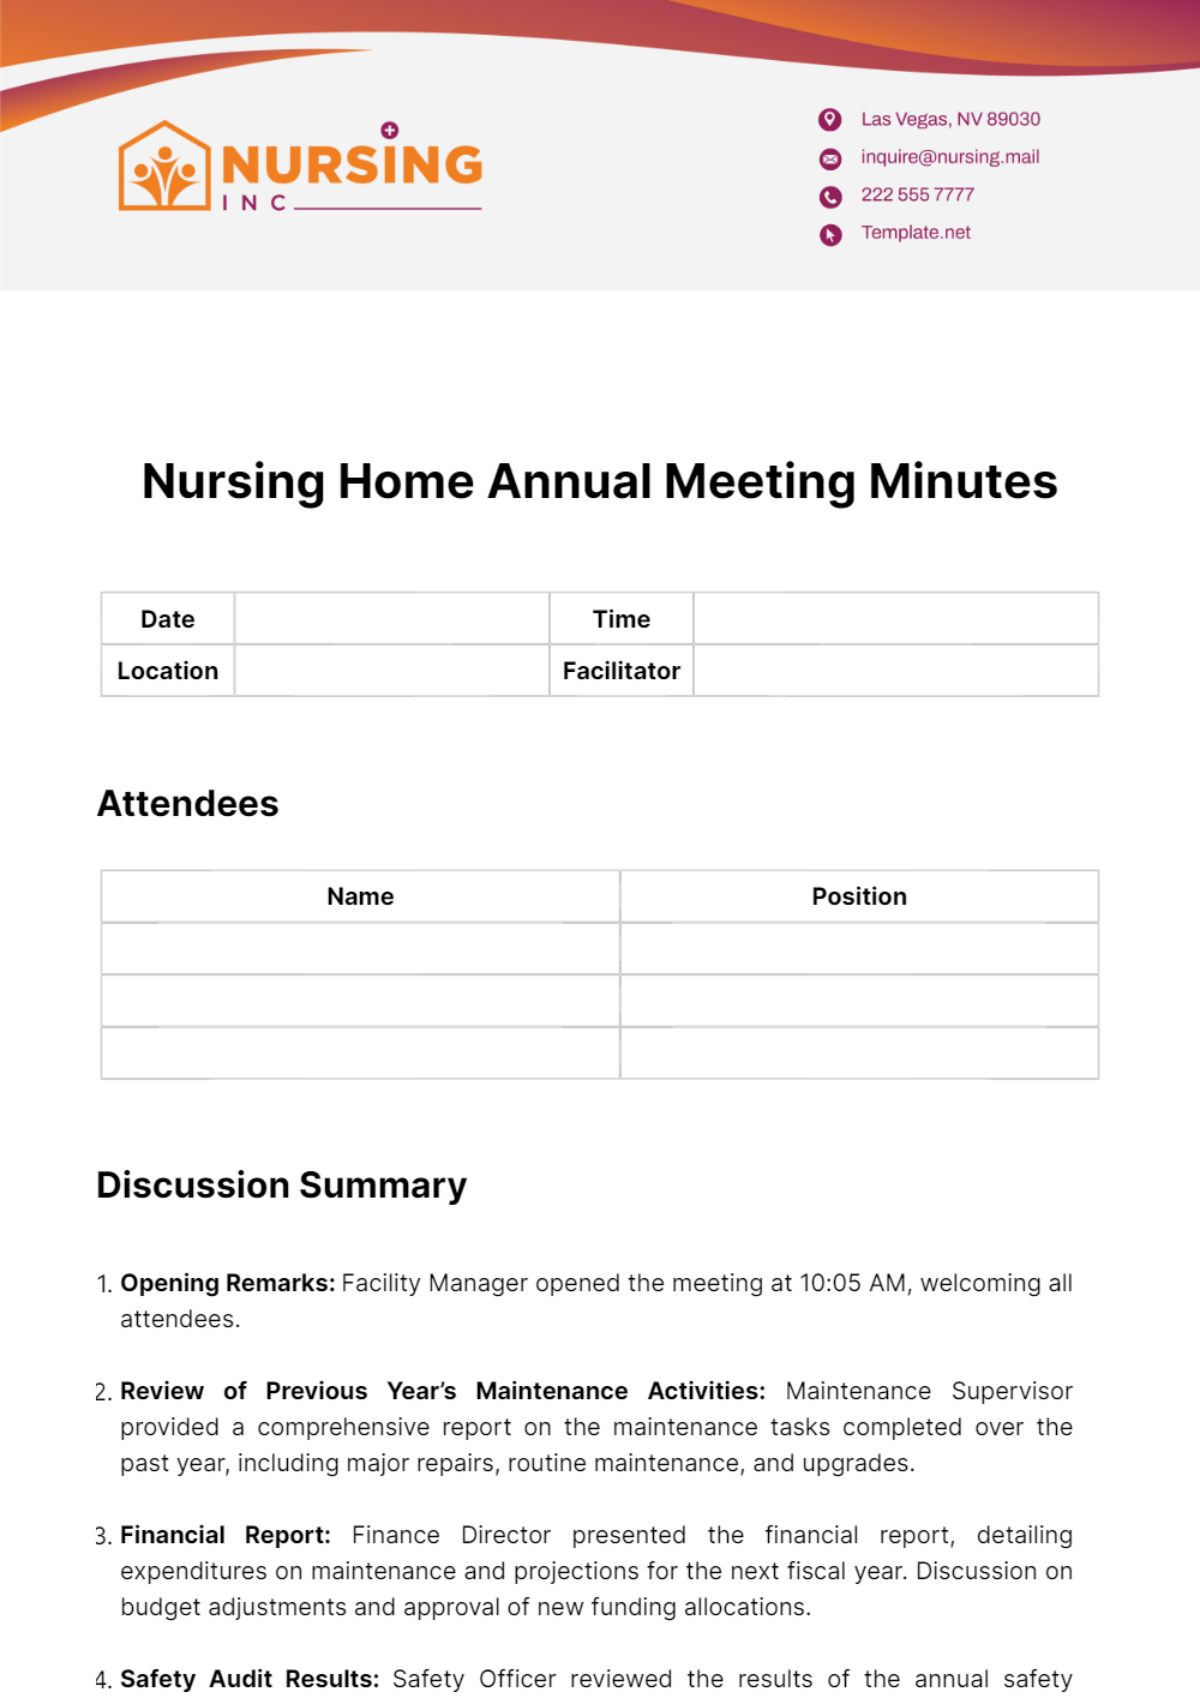 Nursing Home Annual Meeting Minutes Template